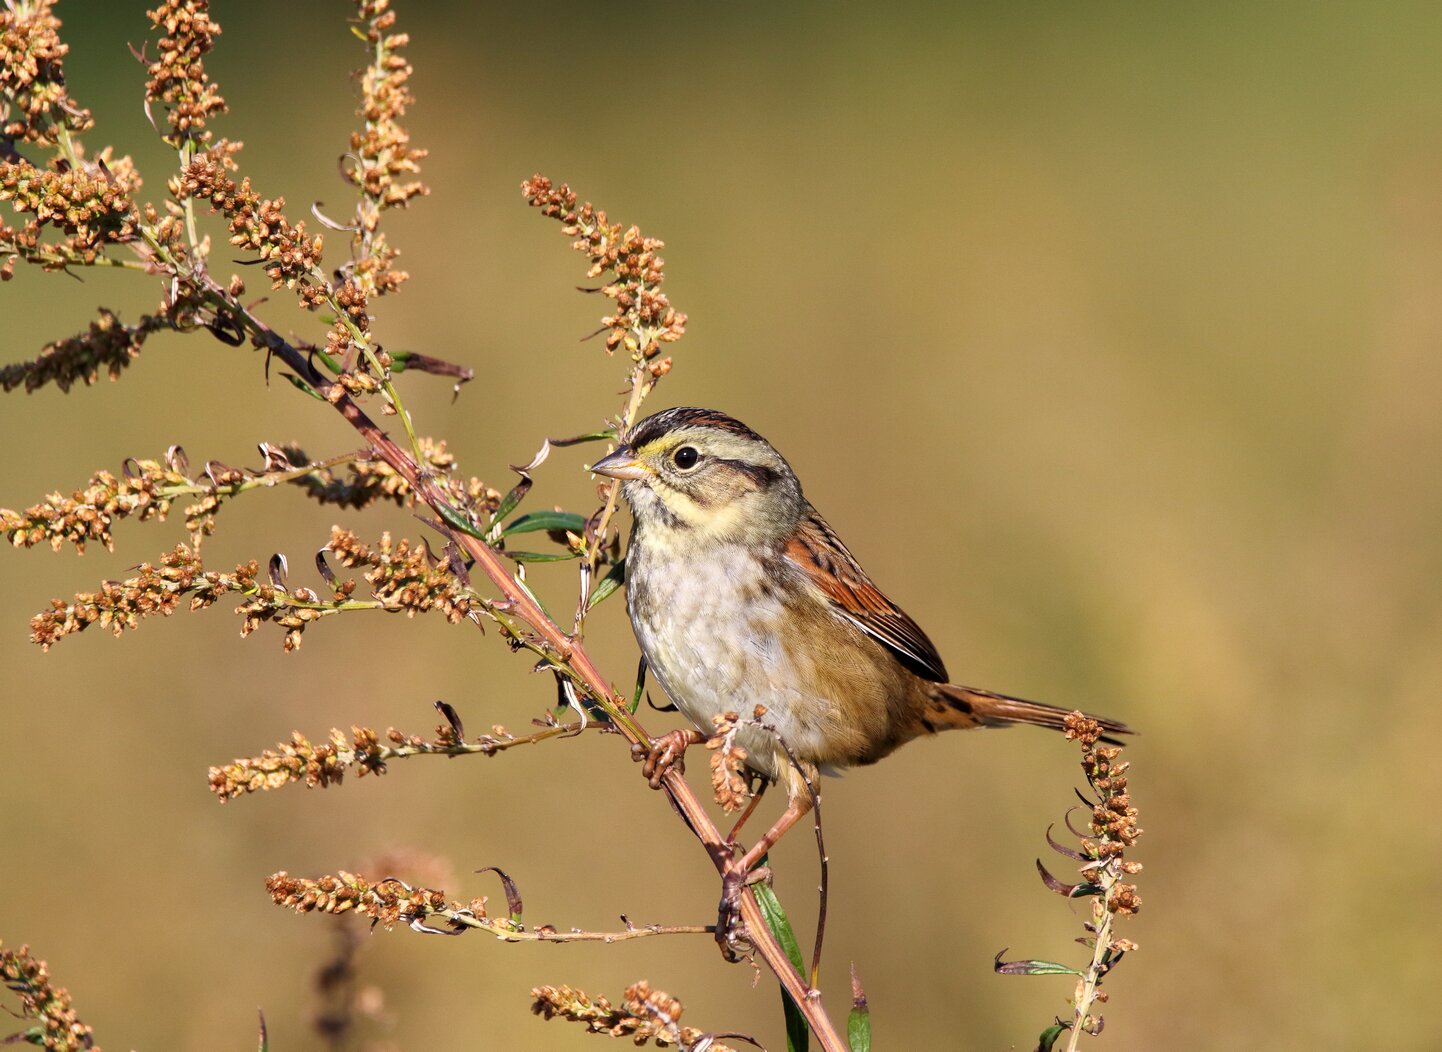 The contrasting warm buff and cool gray of the Swamp Sparrow make it stand out from the sparrow crowd. Photo: <a href="https://www.flickr.com/photos/120553232@N02/" target="_blank" >Isaac Grant</a>